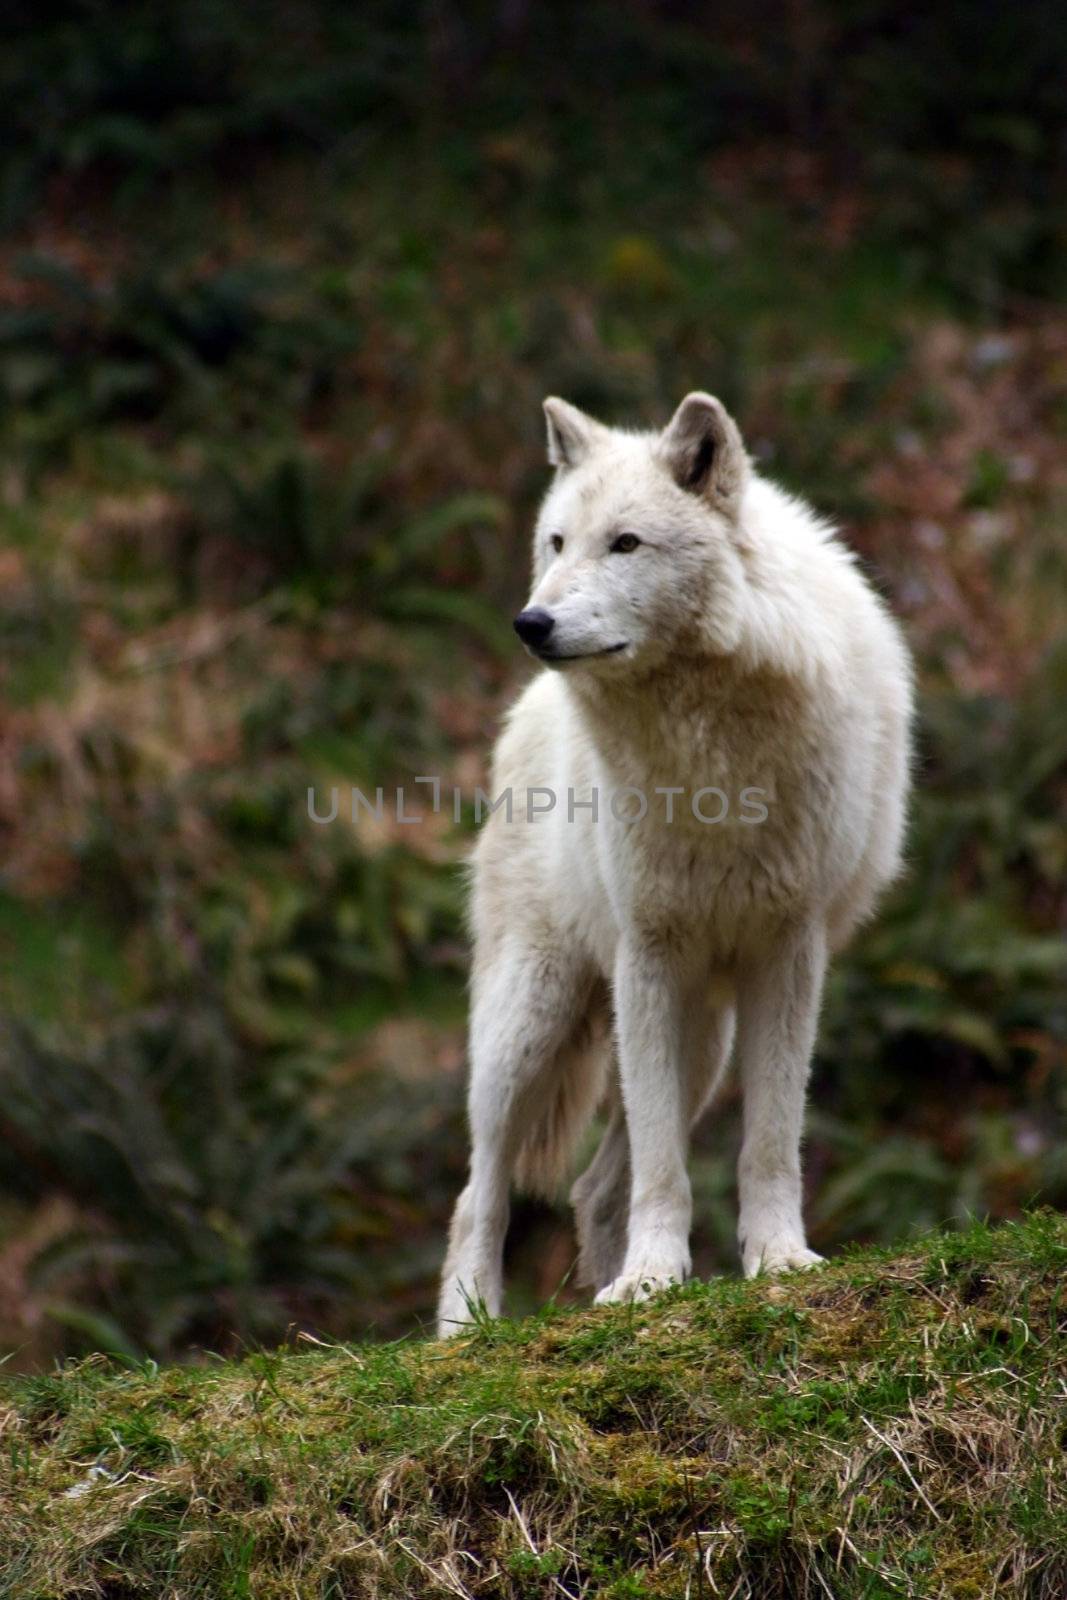 White Wolf by micahbowerbank